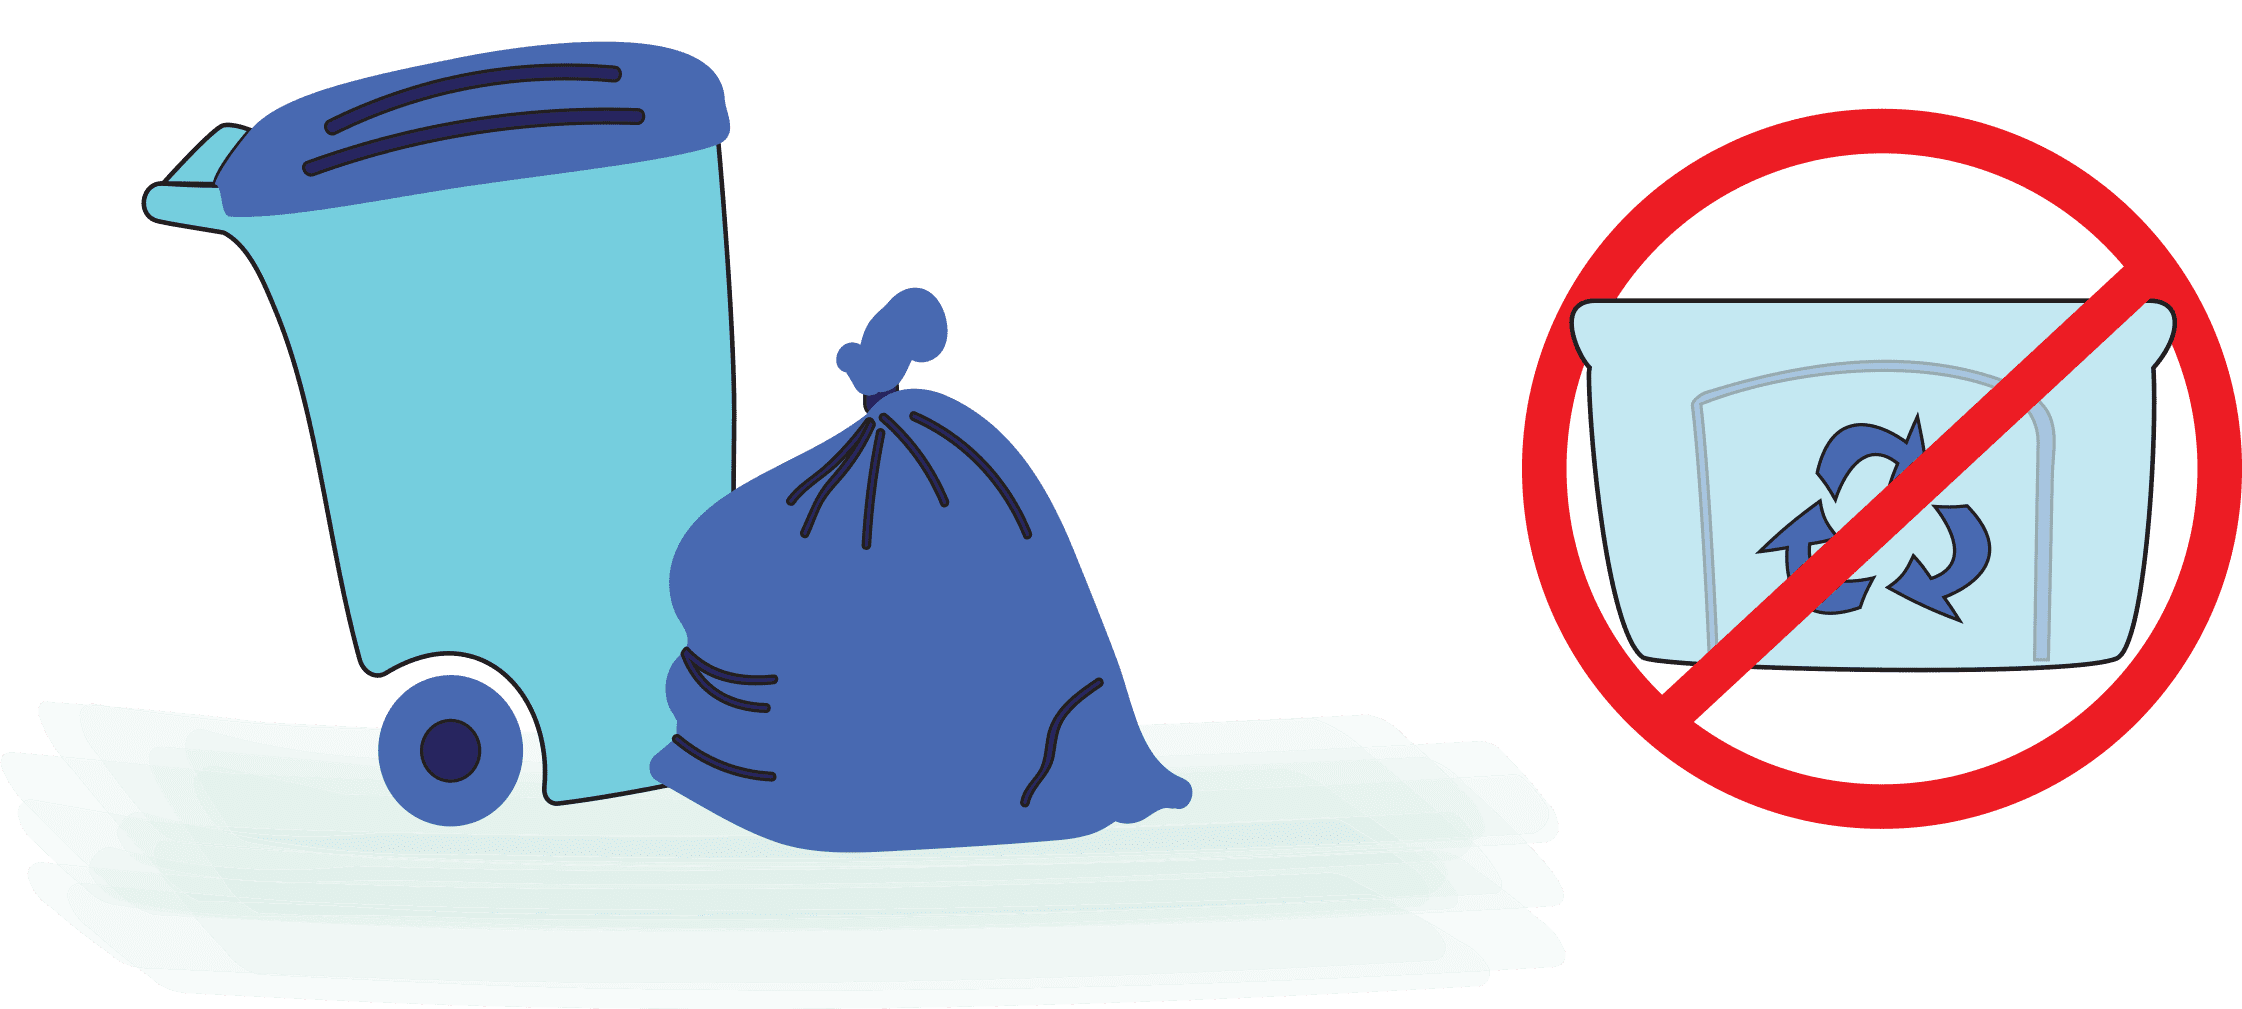 Put the plastic container in the household trash - don't recycle!